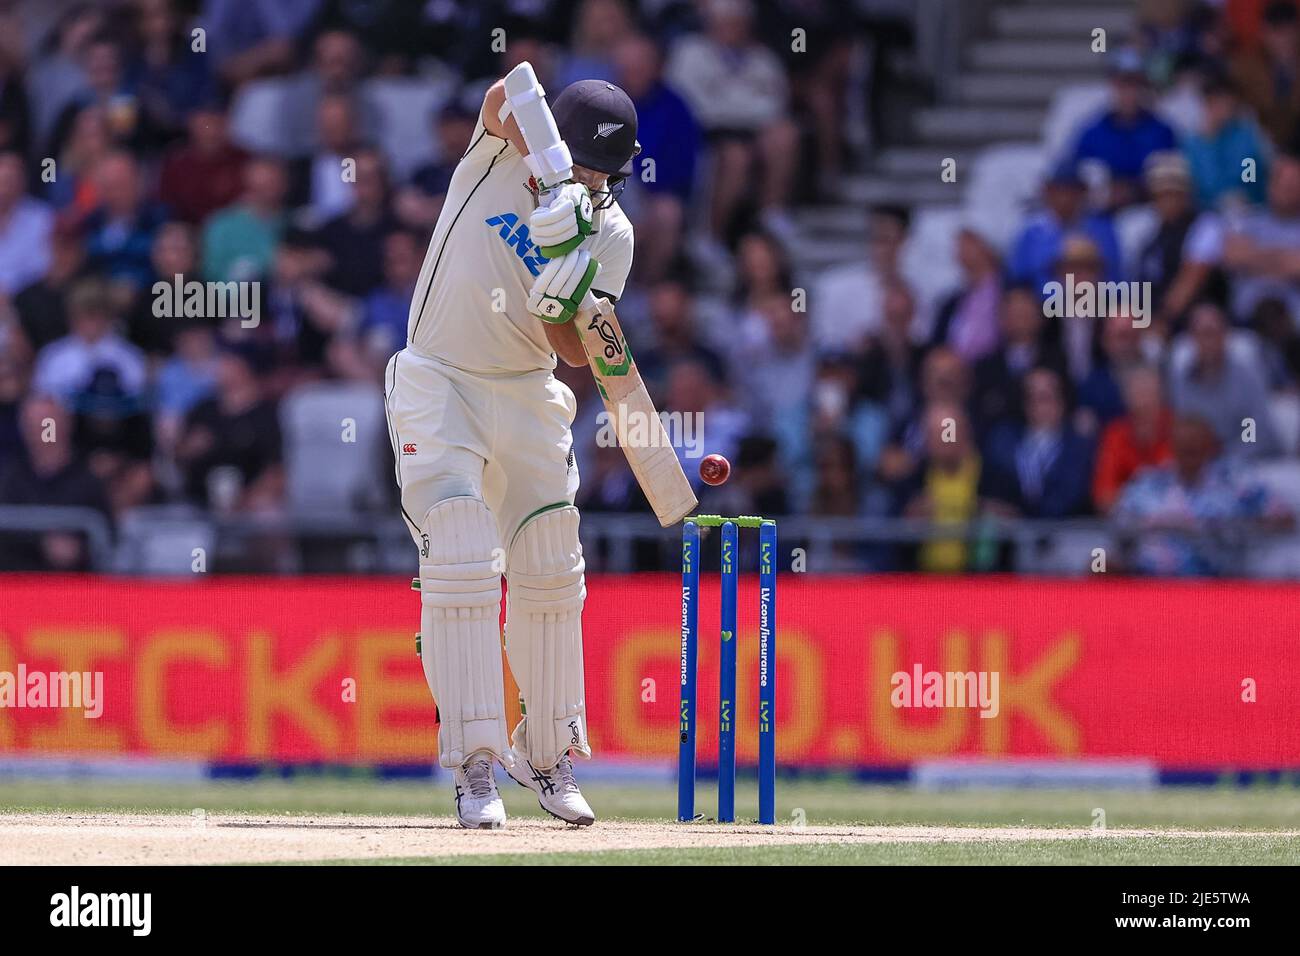 Leeds, UK. 25th June, 2022. Tom Latham of New Zealand in action during the game in Leeds, United Kingdom on 6/25/2022. (Photo by Mark Cosgrove/News Images/Sipa USA) Credit: Sipa USA/Alamy Live News Stock Photo